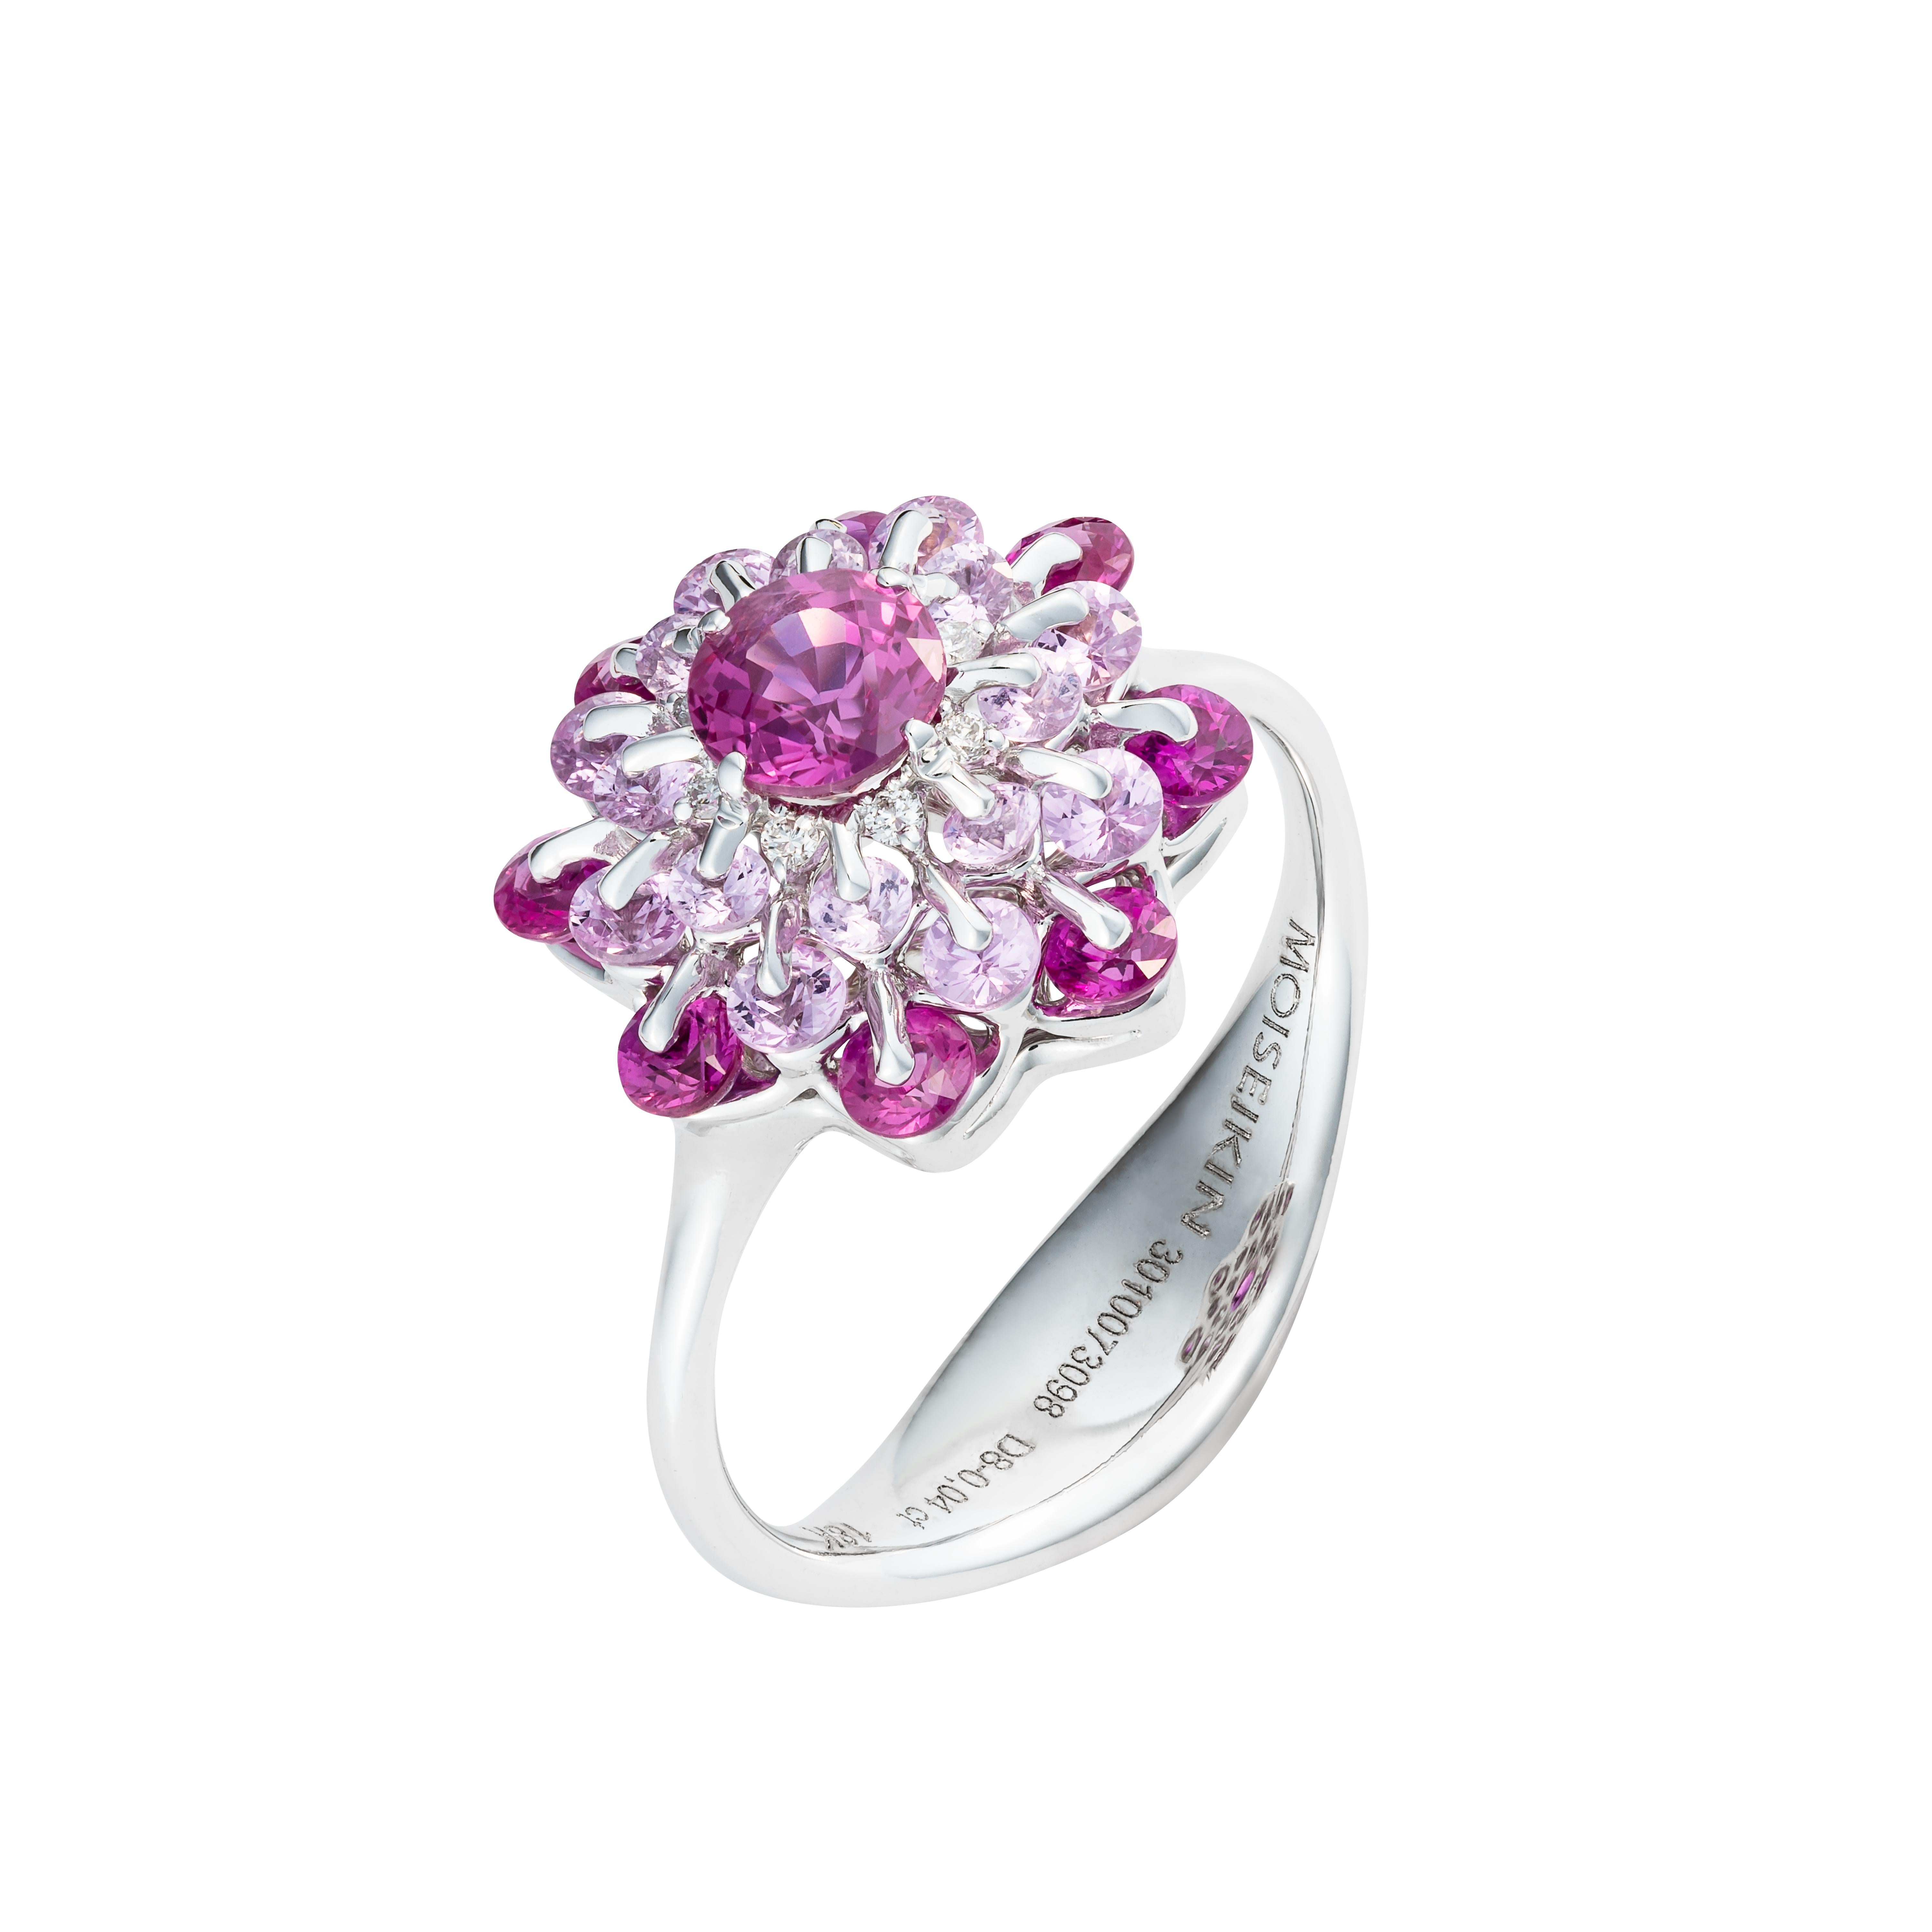 MOISEIKIN's Pink Sapphire and Diamond ring, a stunning creation crafted in 18K white gold, perfectly aligns with this year's trend. This artwork of colours exhibits a seamless transition of pink shades, embodying femininity in every hue.

A vibrant